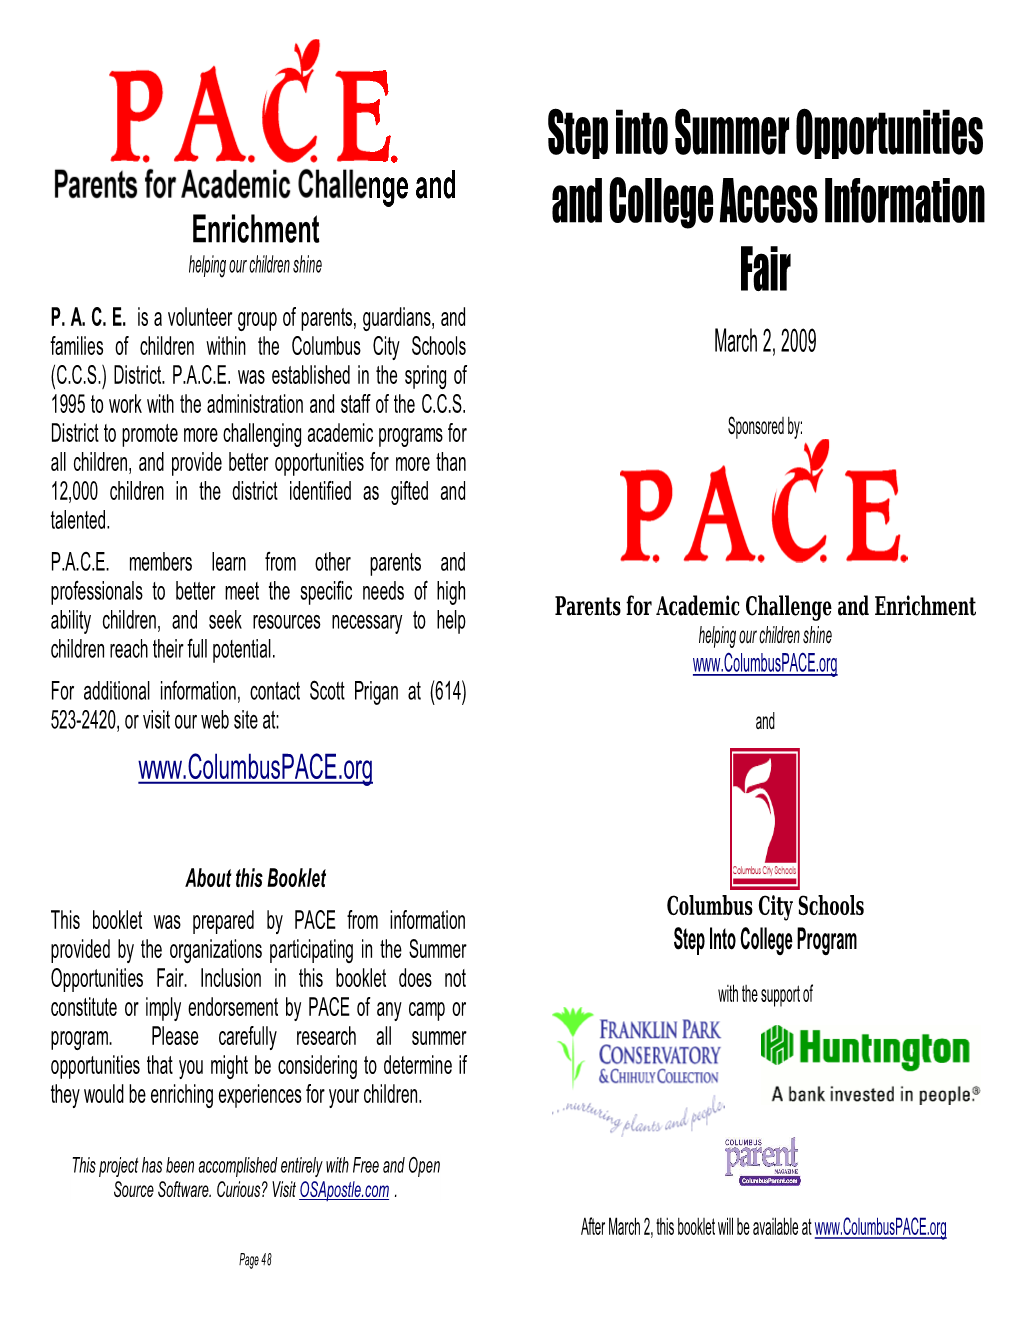 Step Into Summer Opportunities and College Ccess Information Fair